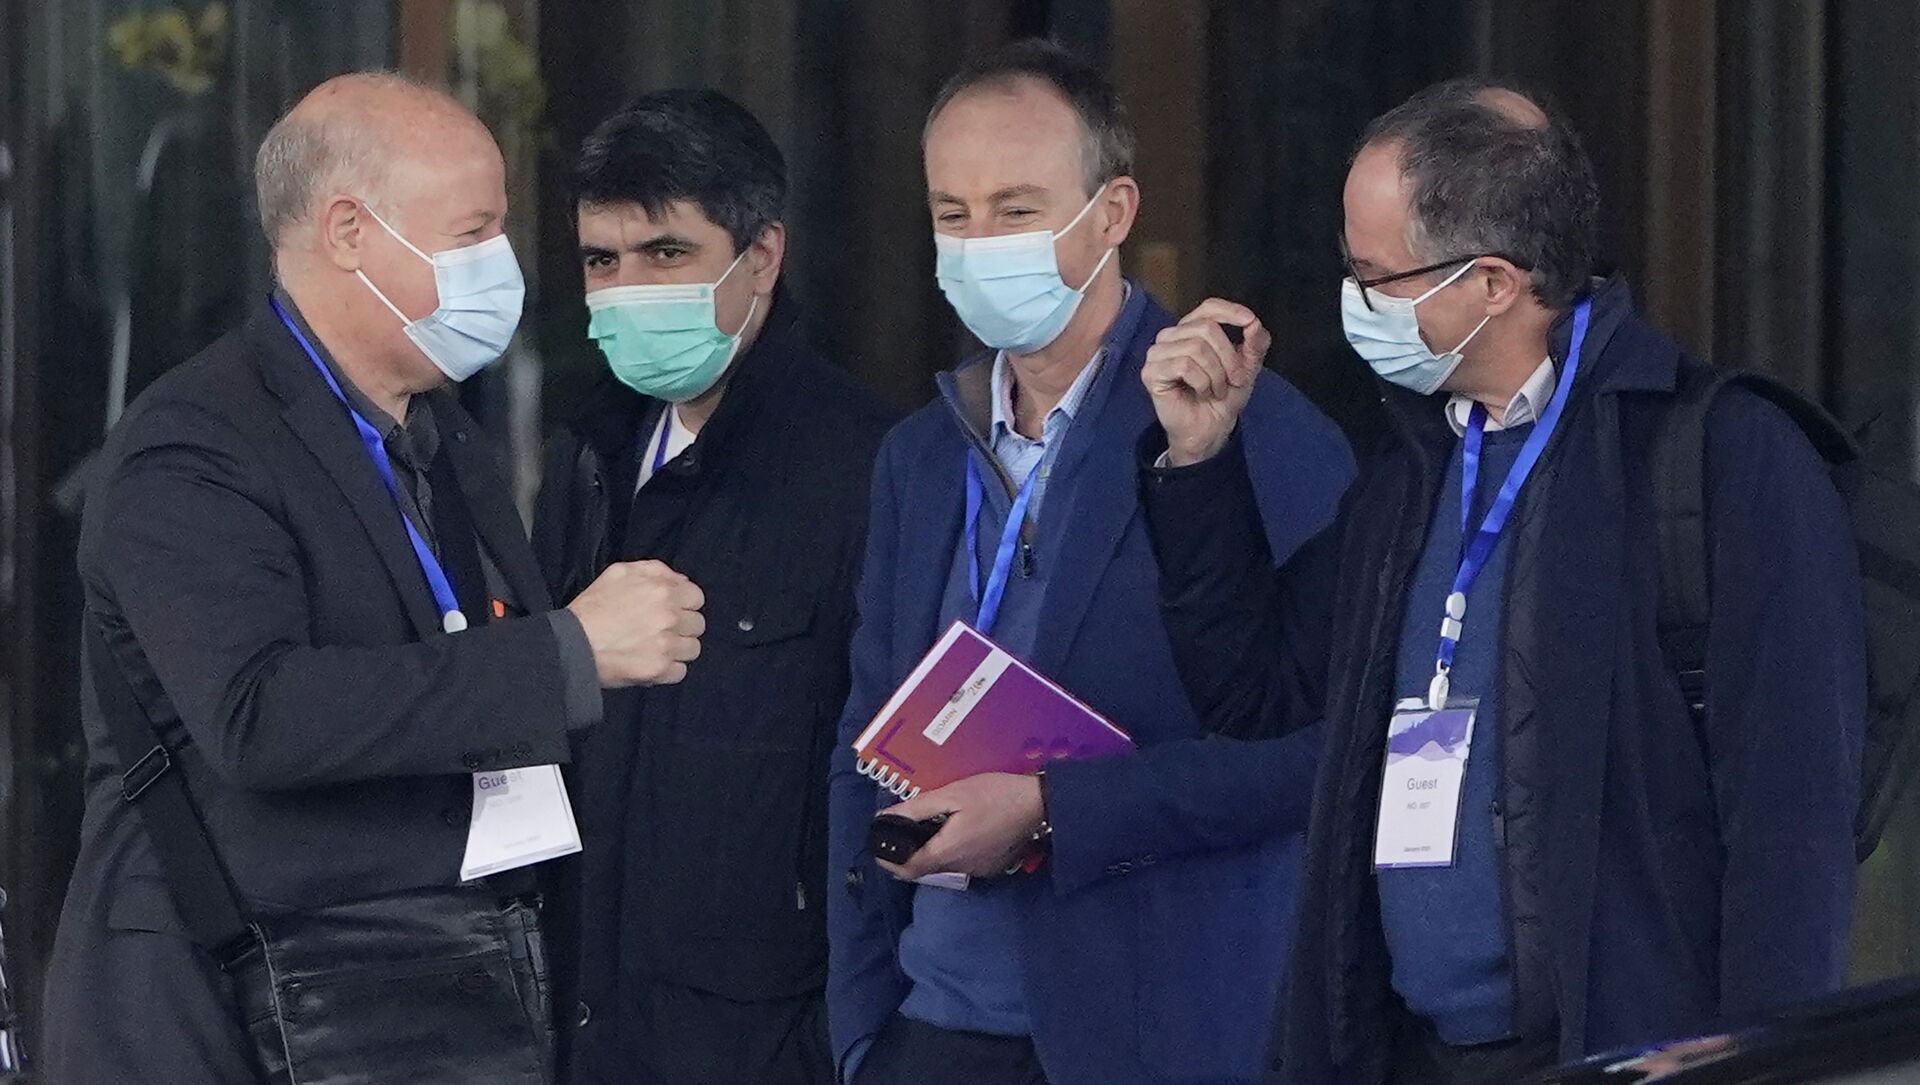 Peter Ben Embarek, right, gestures as Peter Daszak, left, approaches to bump fists with him before they leave the hotel with other members of a World Health Organization team for another day of field visit in Wuhan in central China's Hubei province Tuesday, Feb. 2, 2021 - Sputnik International, 1920, 26.02.2021